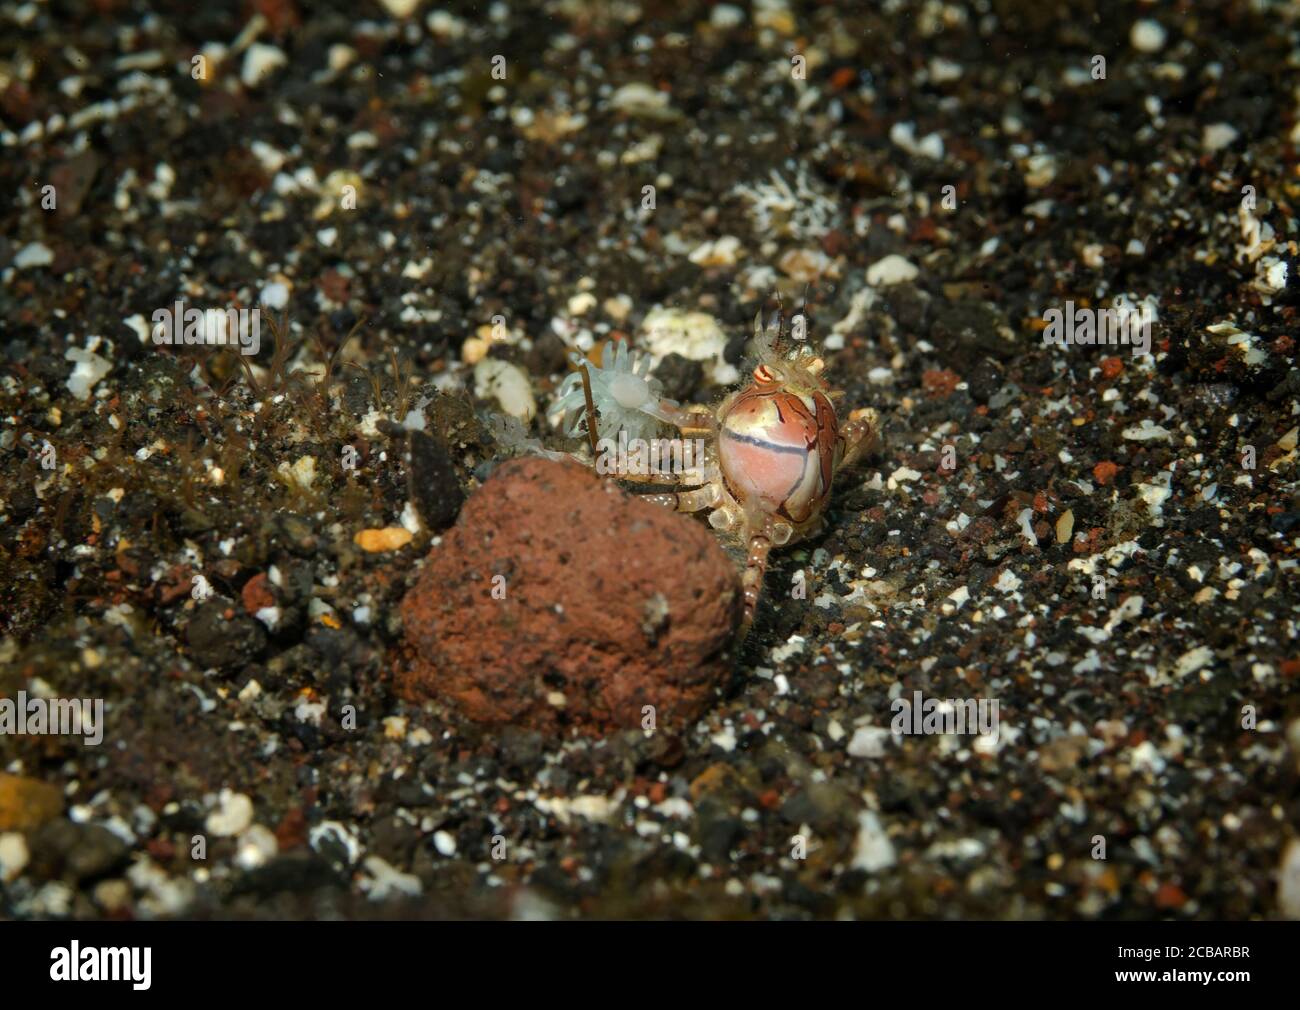 Boxer crab, Lybia tesselata, with defensive anemones attached her arms, hiding behind a stone on volcanic sand beach, Tulamben, Bali, Indonesia Stock Photo